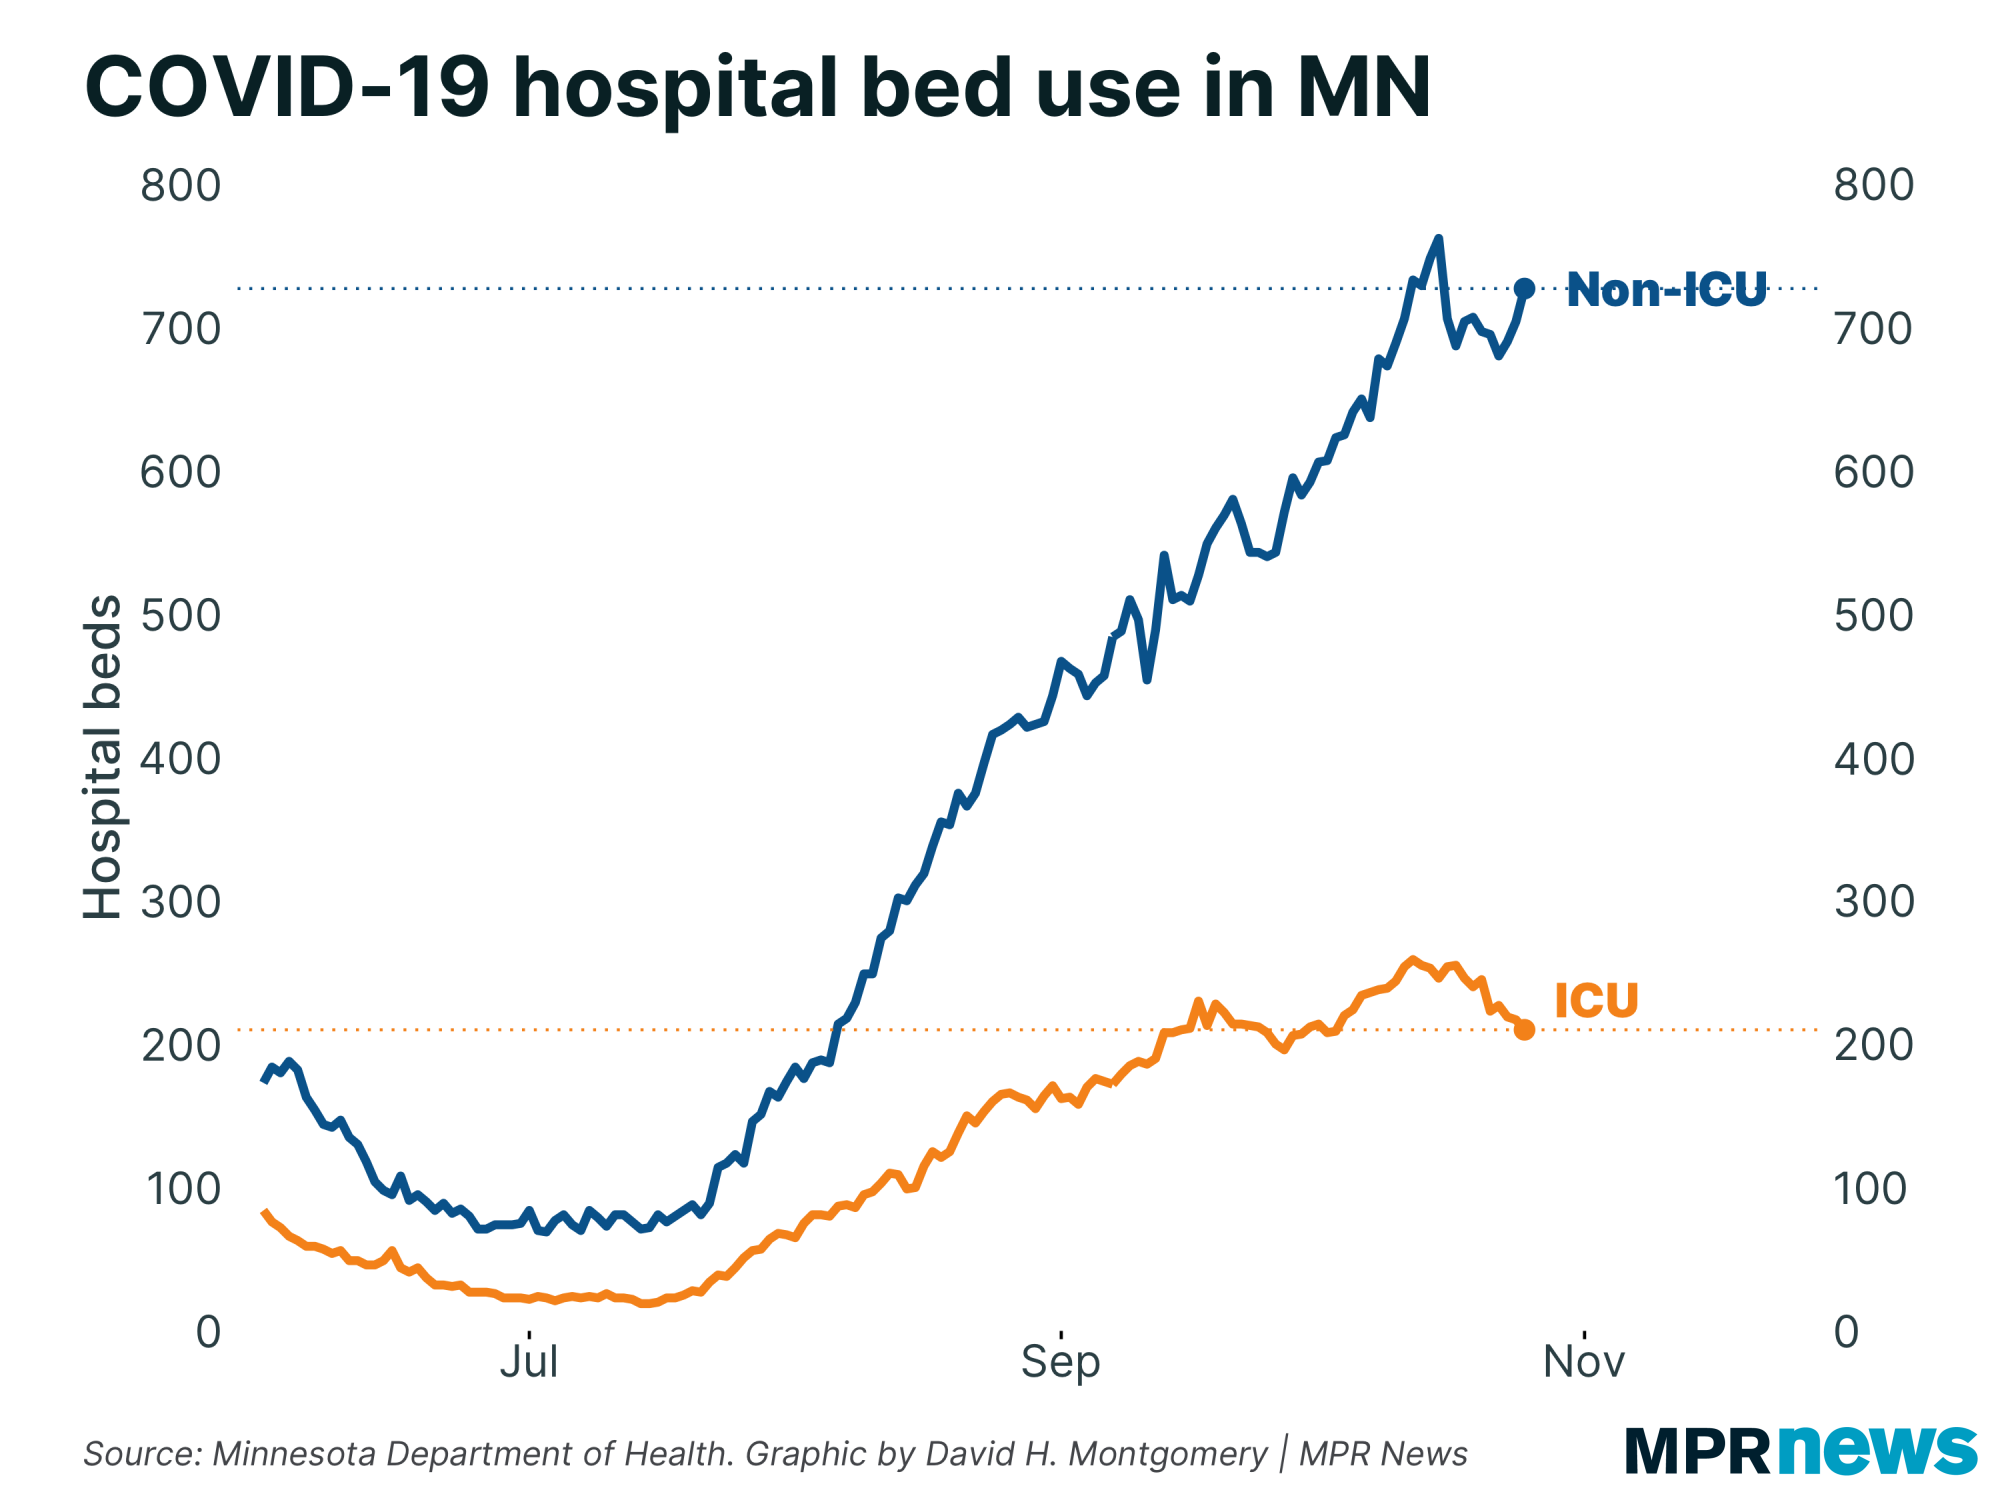 Graph of COVID-19 hospital bed use